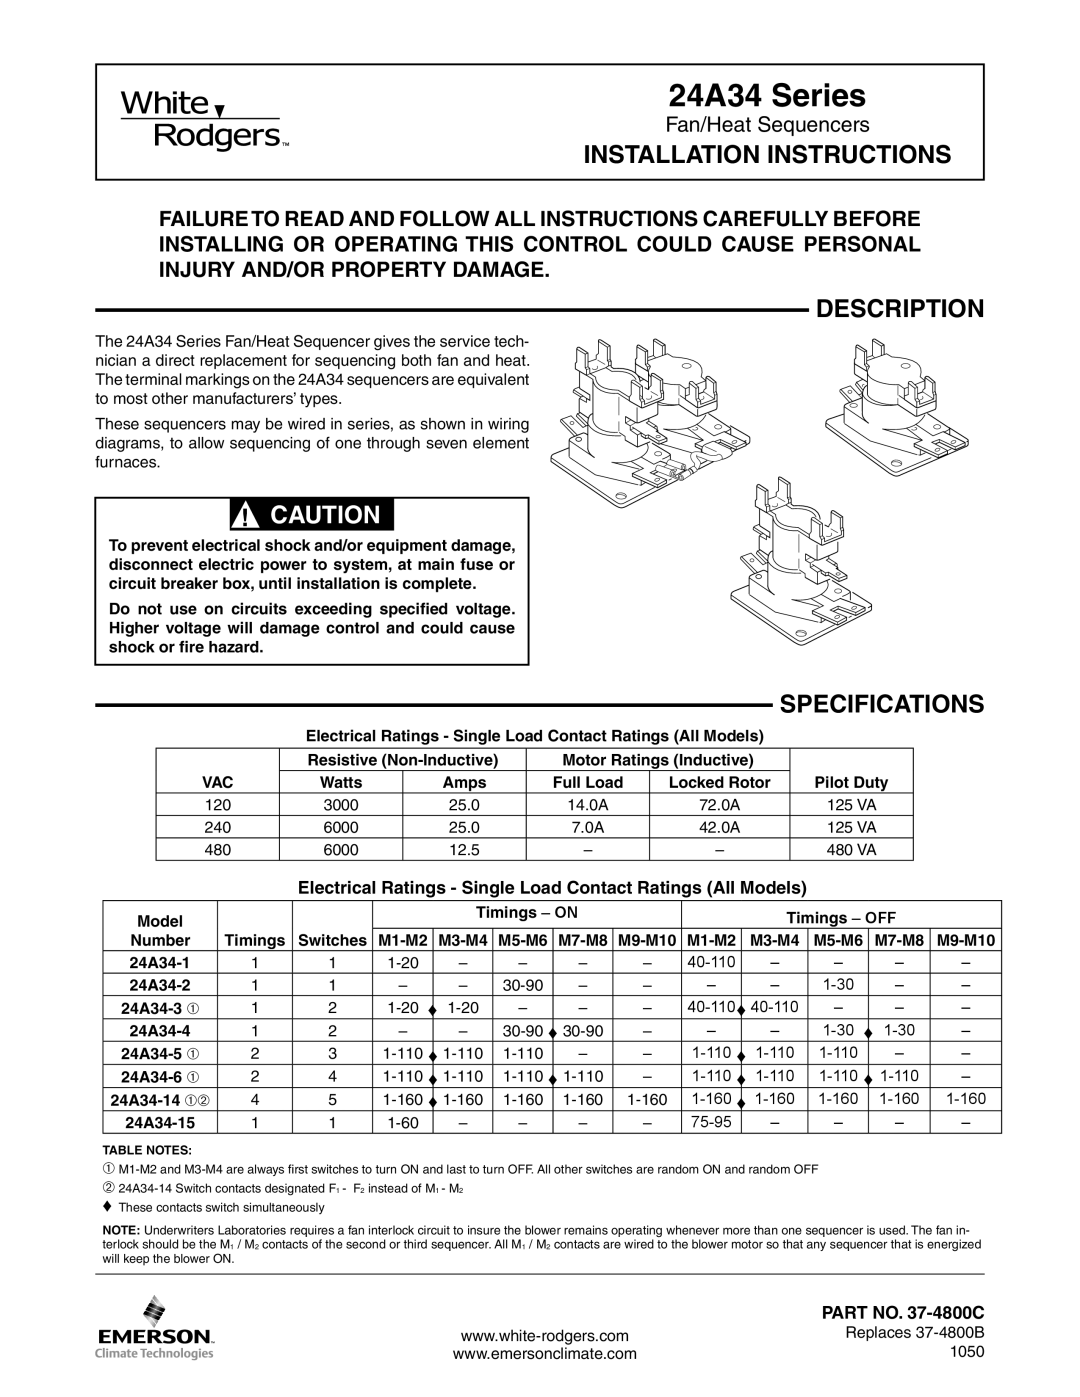 White Rodgers 24A34-5 installation instructions Installation Instructions, Description, Resistive Non-Inductive, Amps 